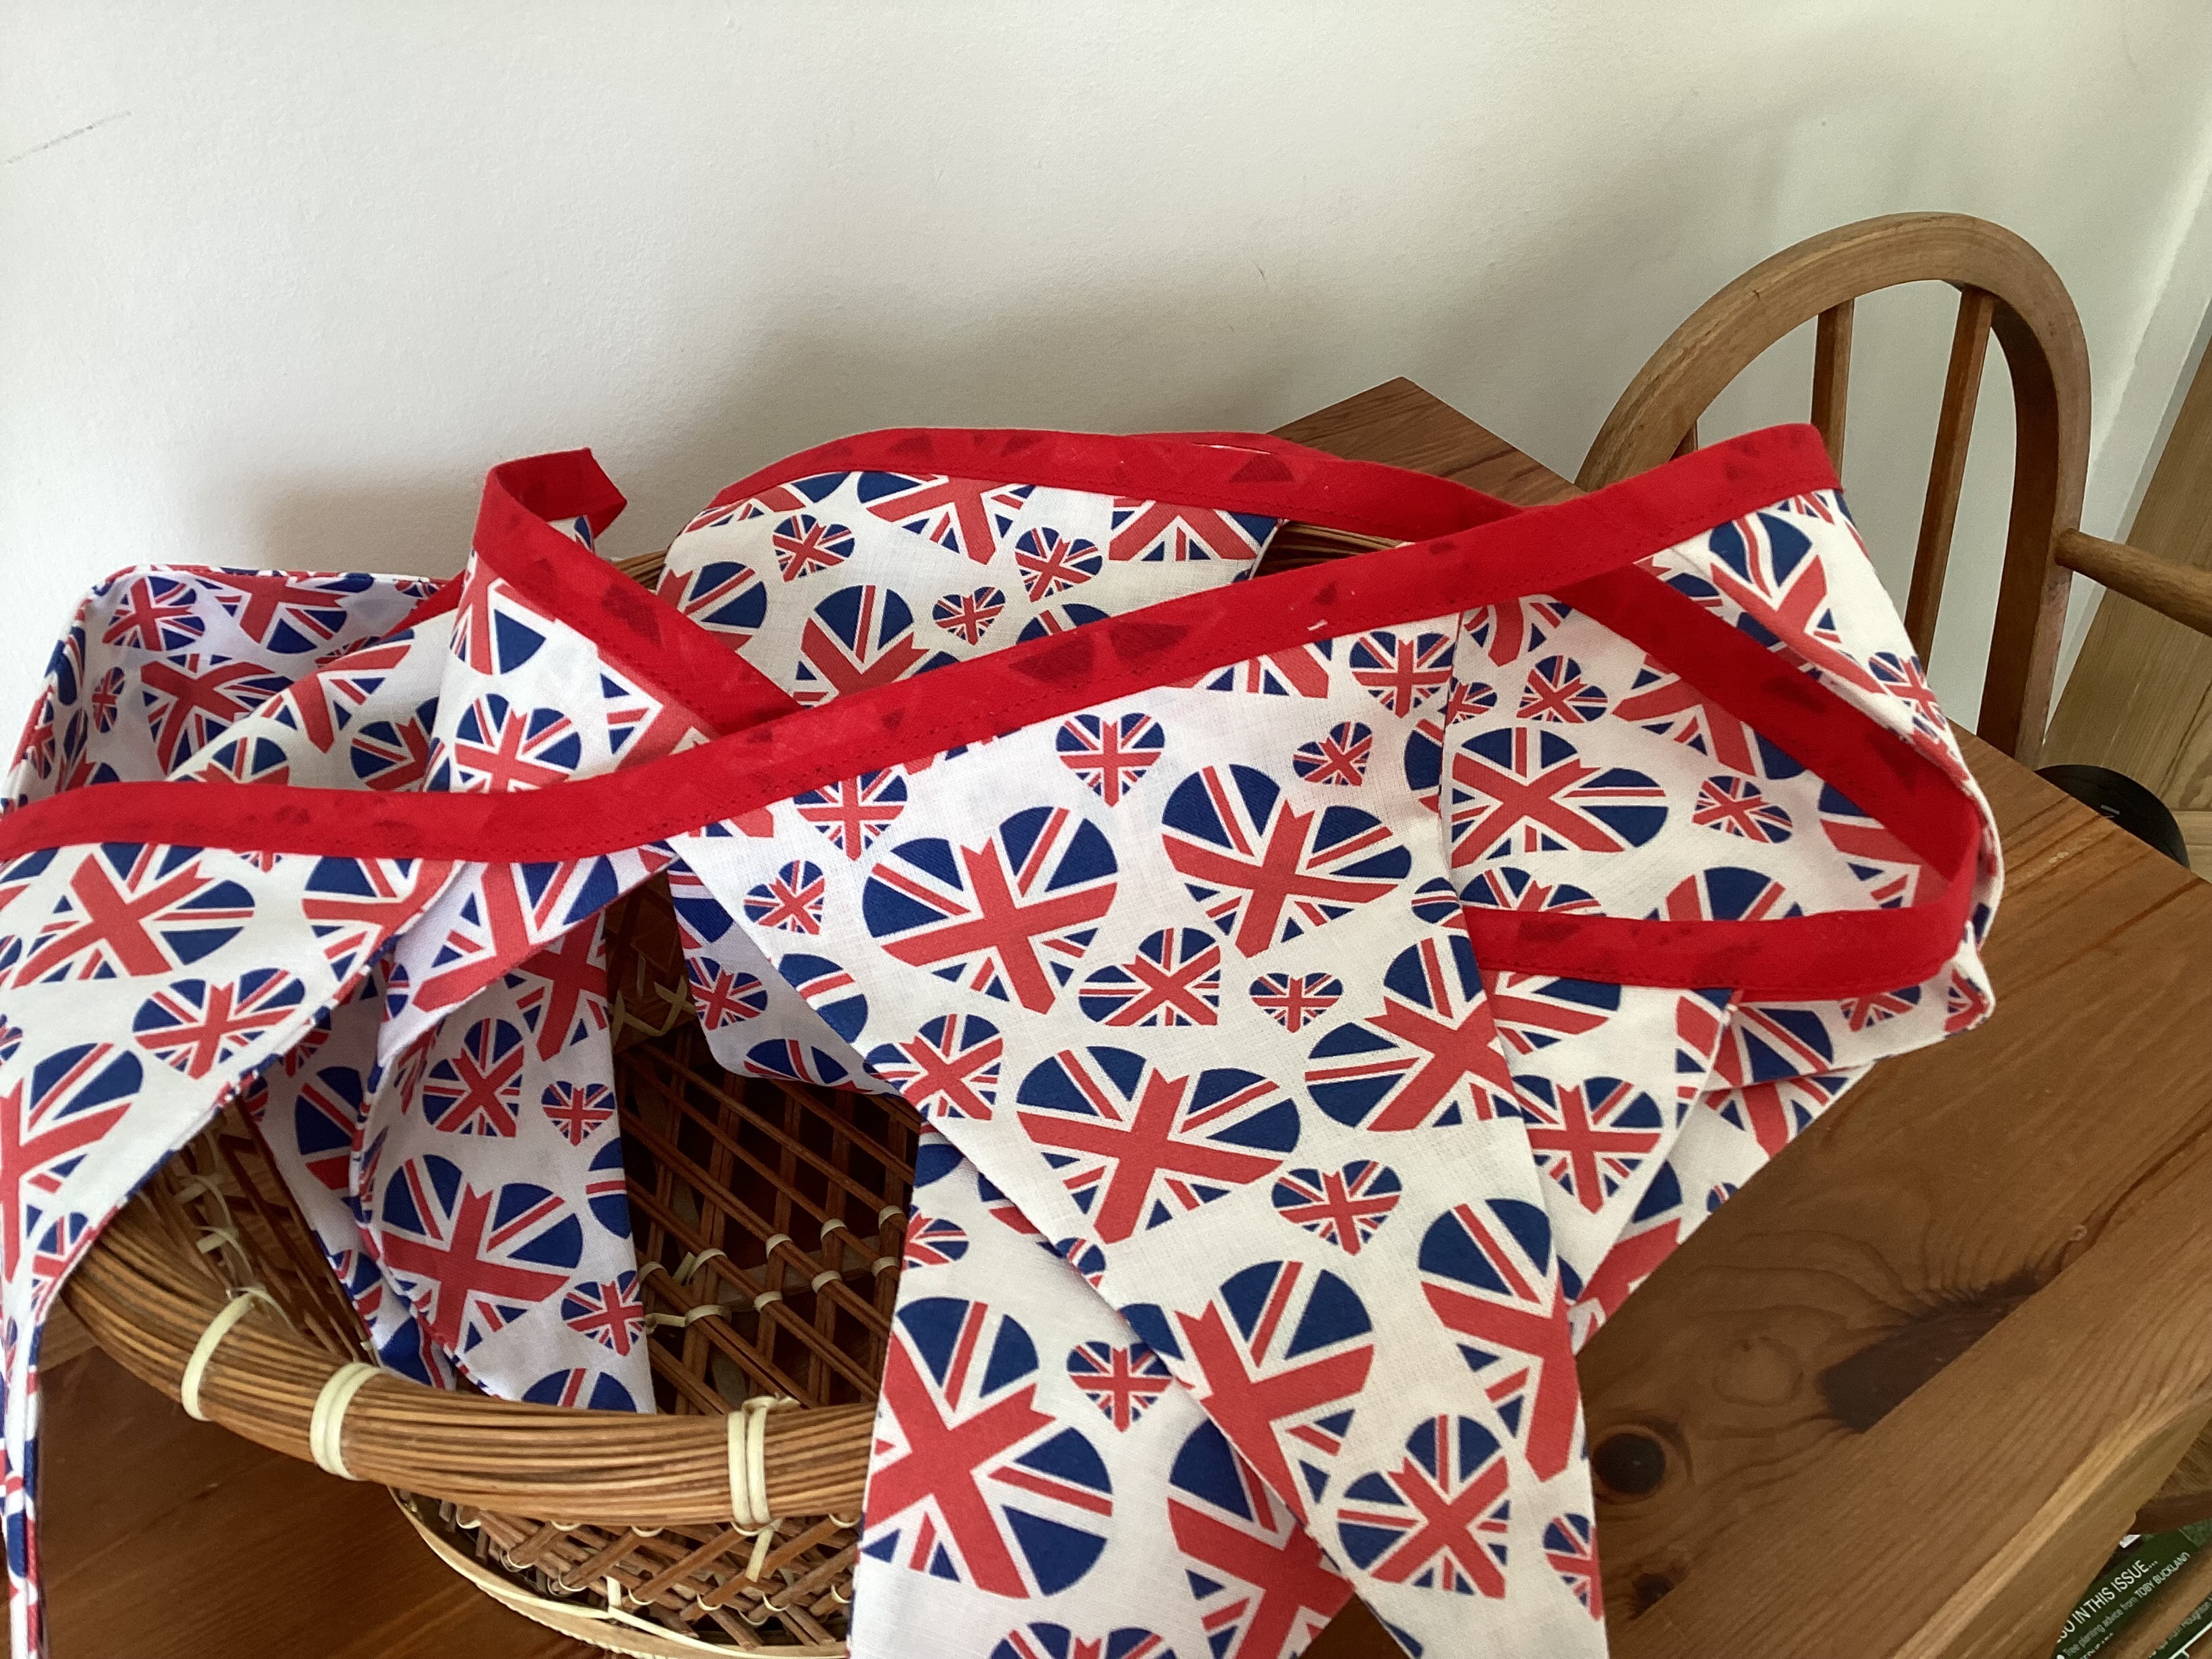 Bunting - Union Jack flags